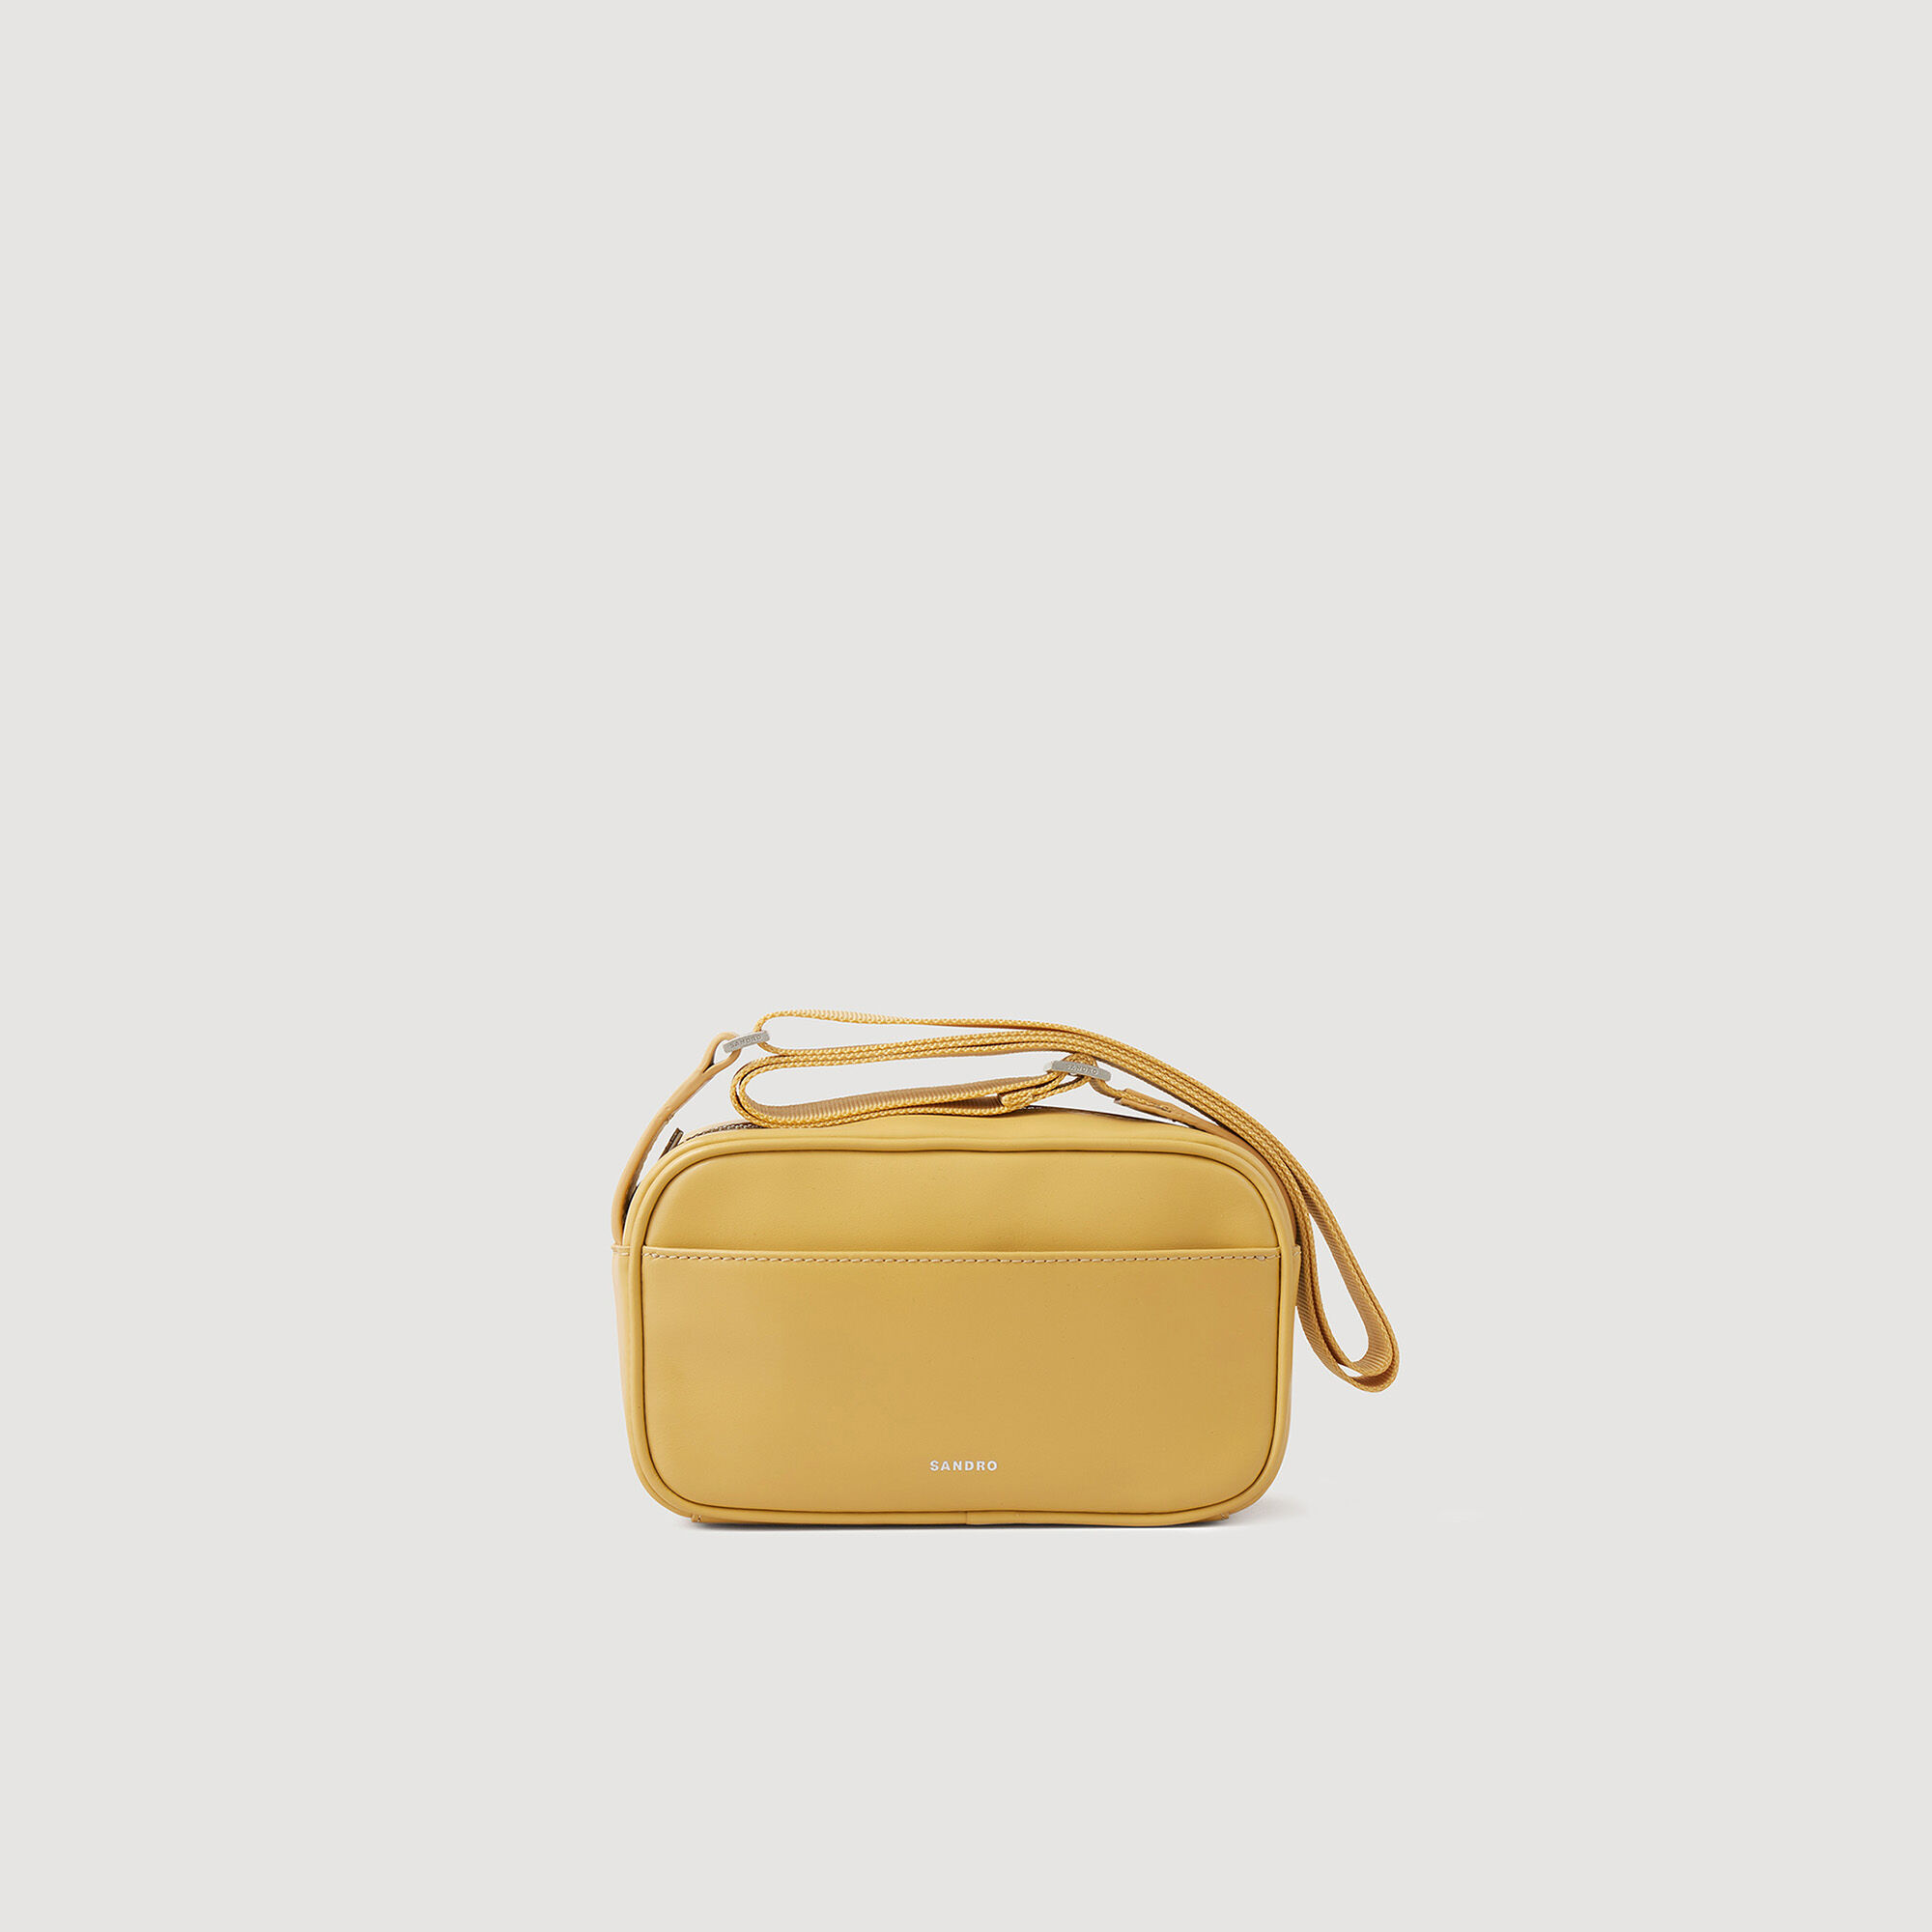 Small smooth leather bag